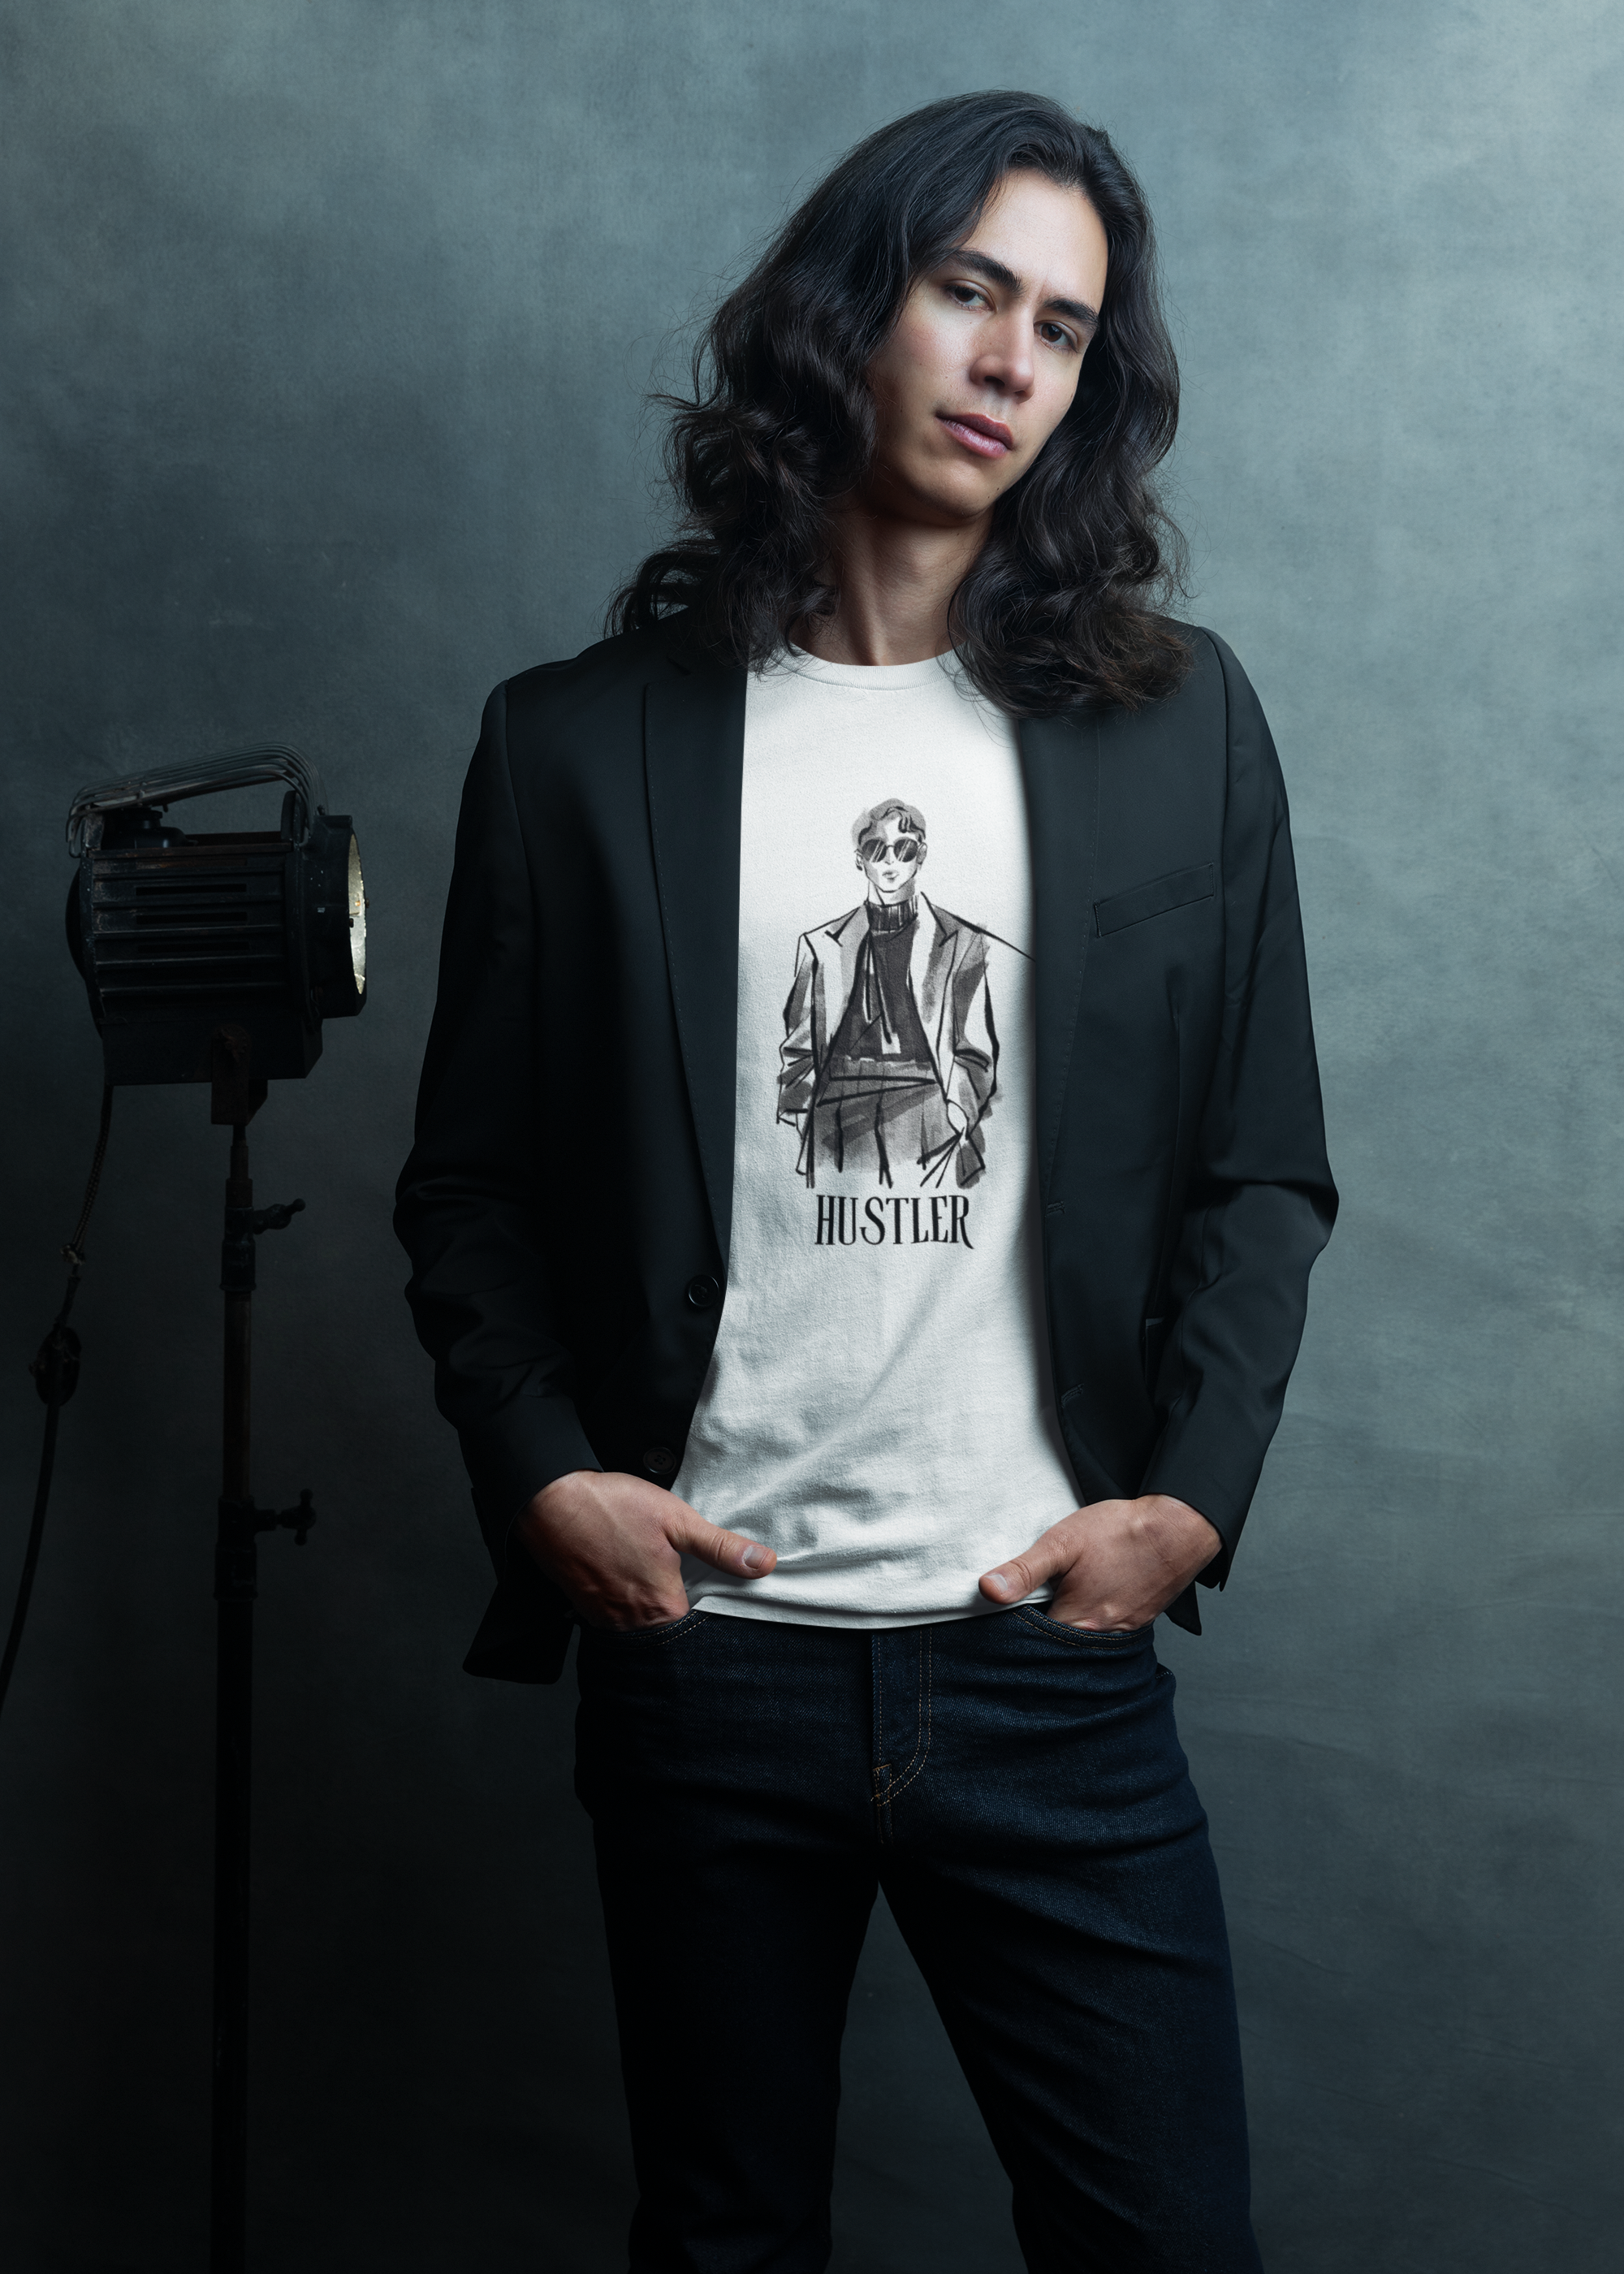 bella-canvas-t-shirt-mockup-featuring-a-long-haired-man-posing-for-an-editorial-shoot-m33212.png